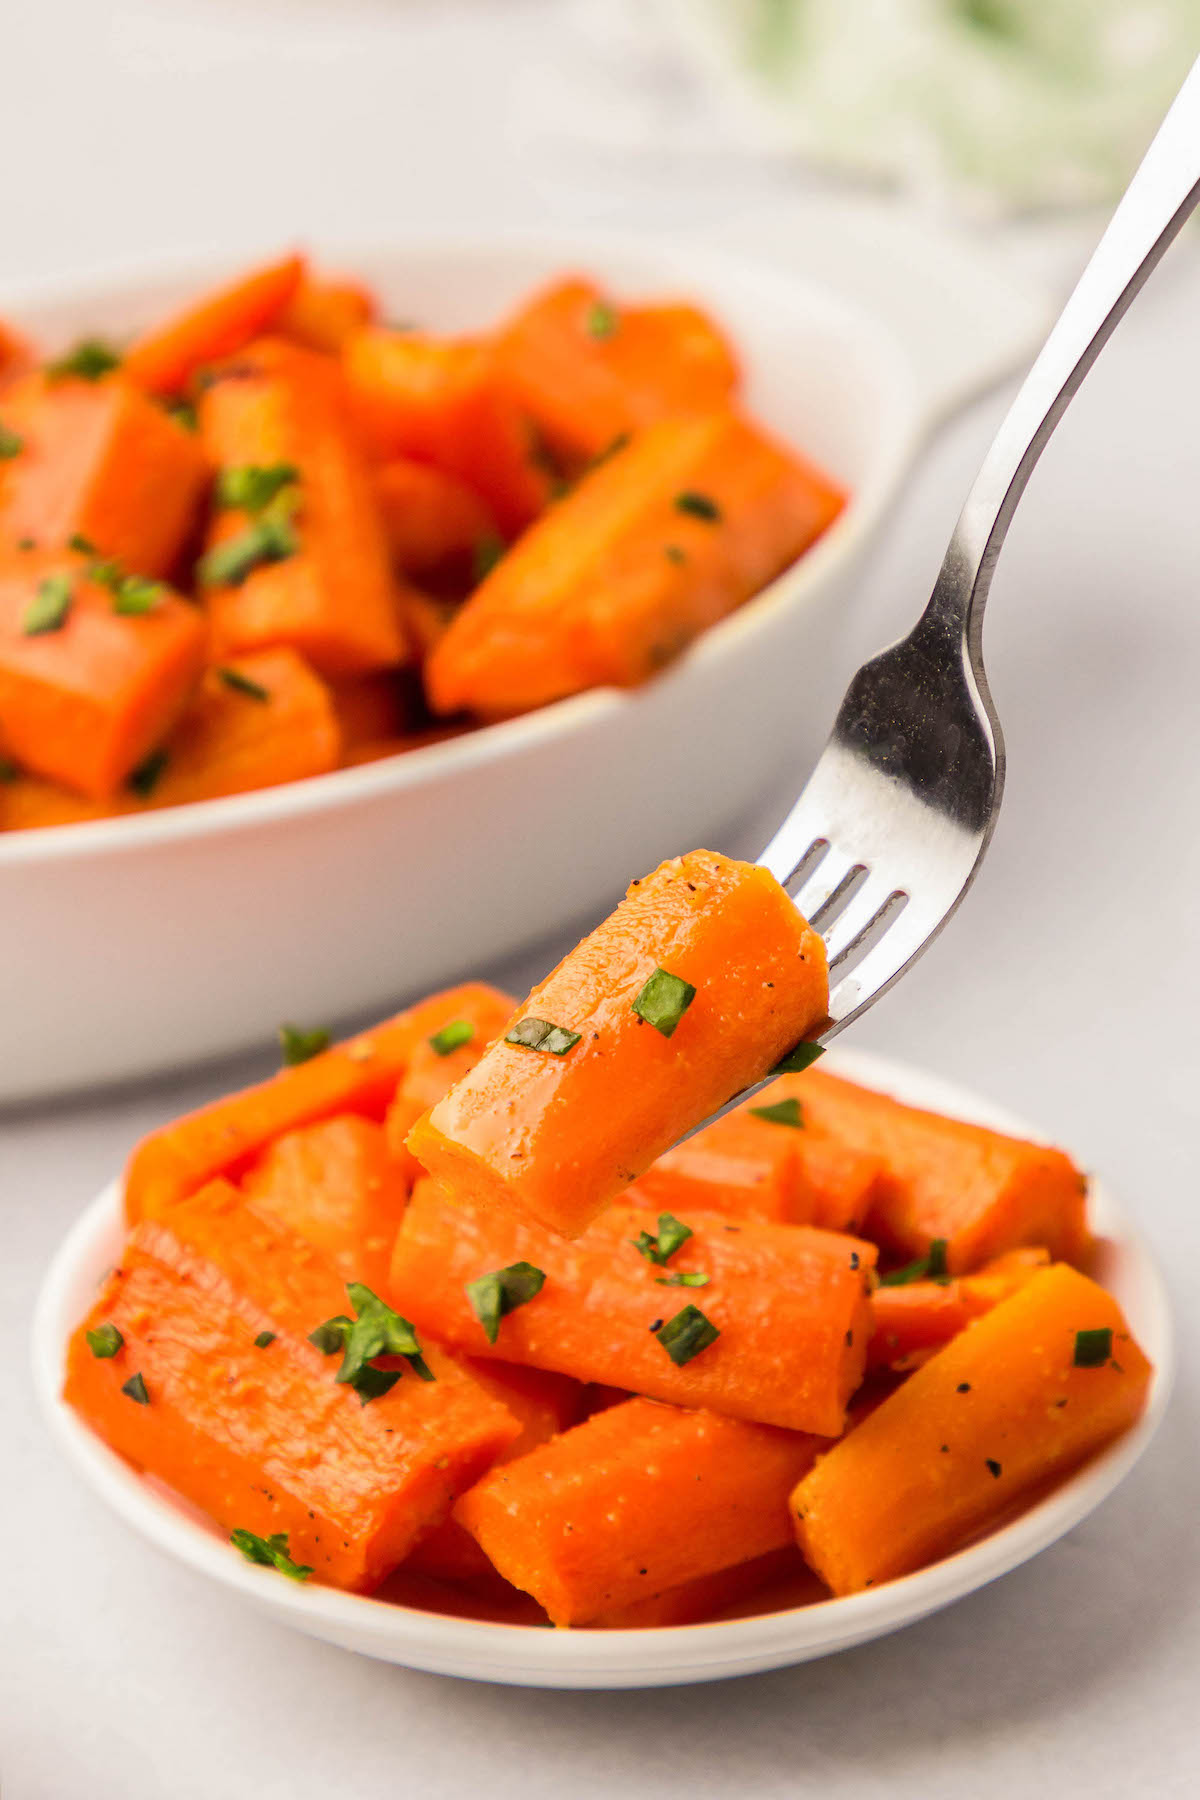 Roasted carrot piece with parsley on a fork